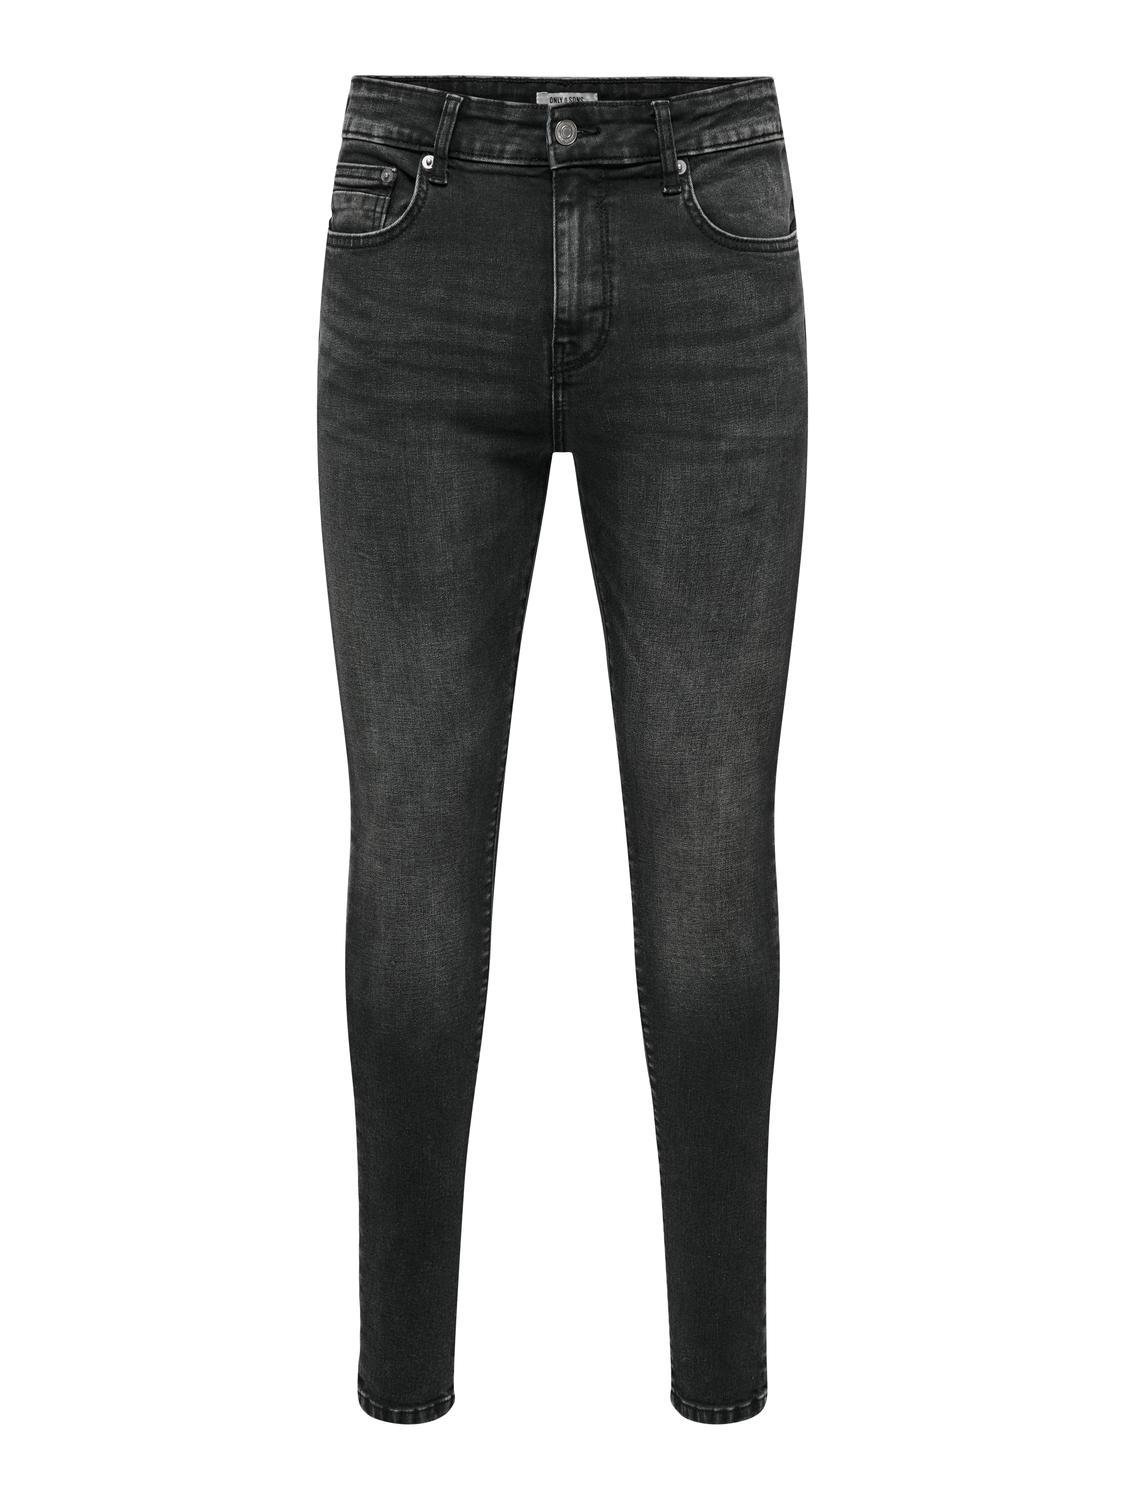 ONLY & SONS Spray on fit Mid rise Jeans -Black Denim - 22027848